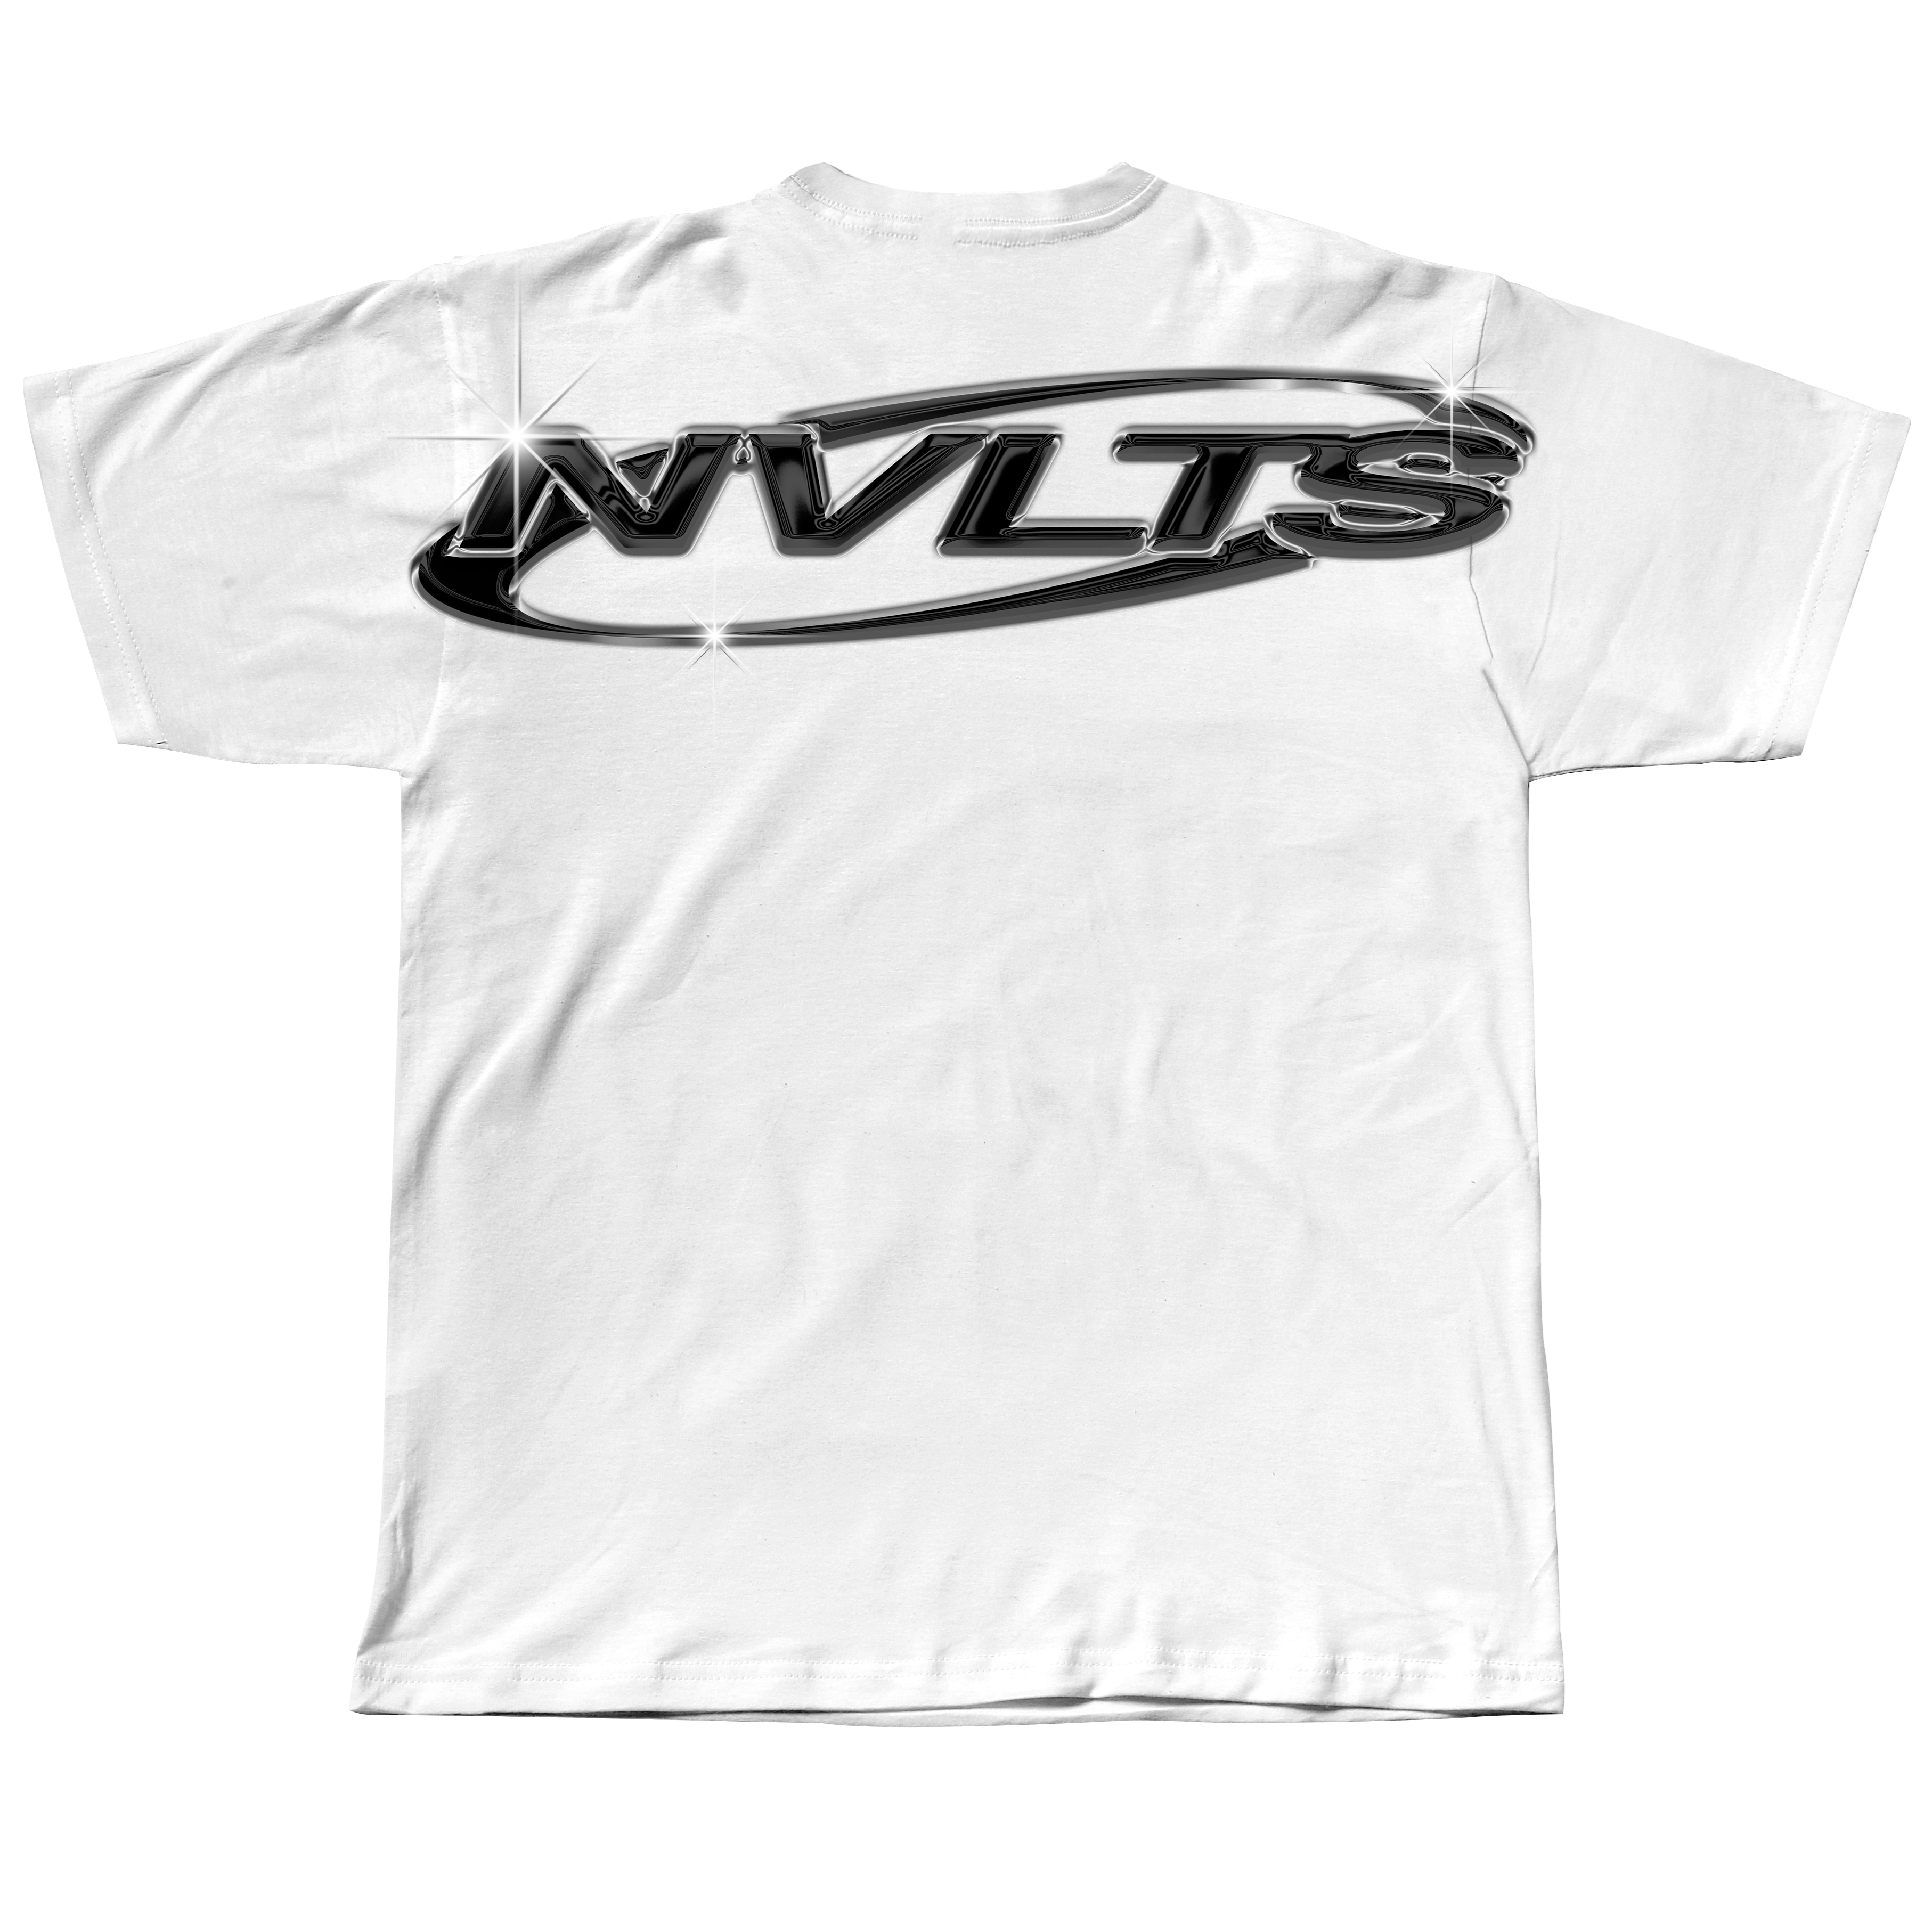 NVLTS "Rally" Chrome Drop Shoulder Oversized Tee - White and Black Chrome